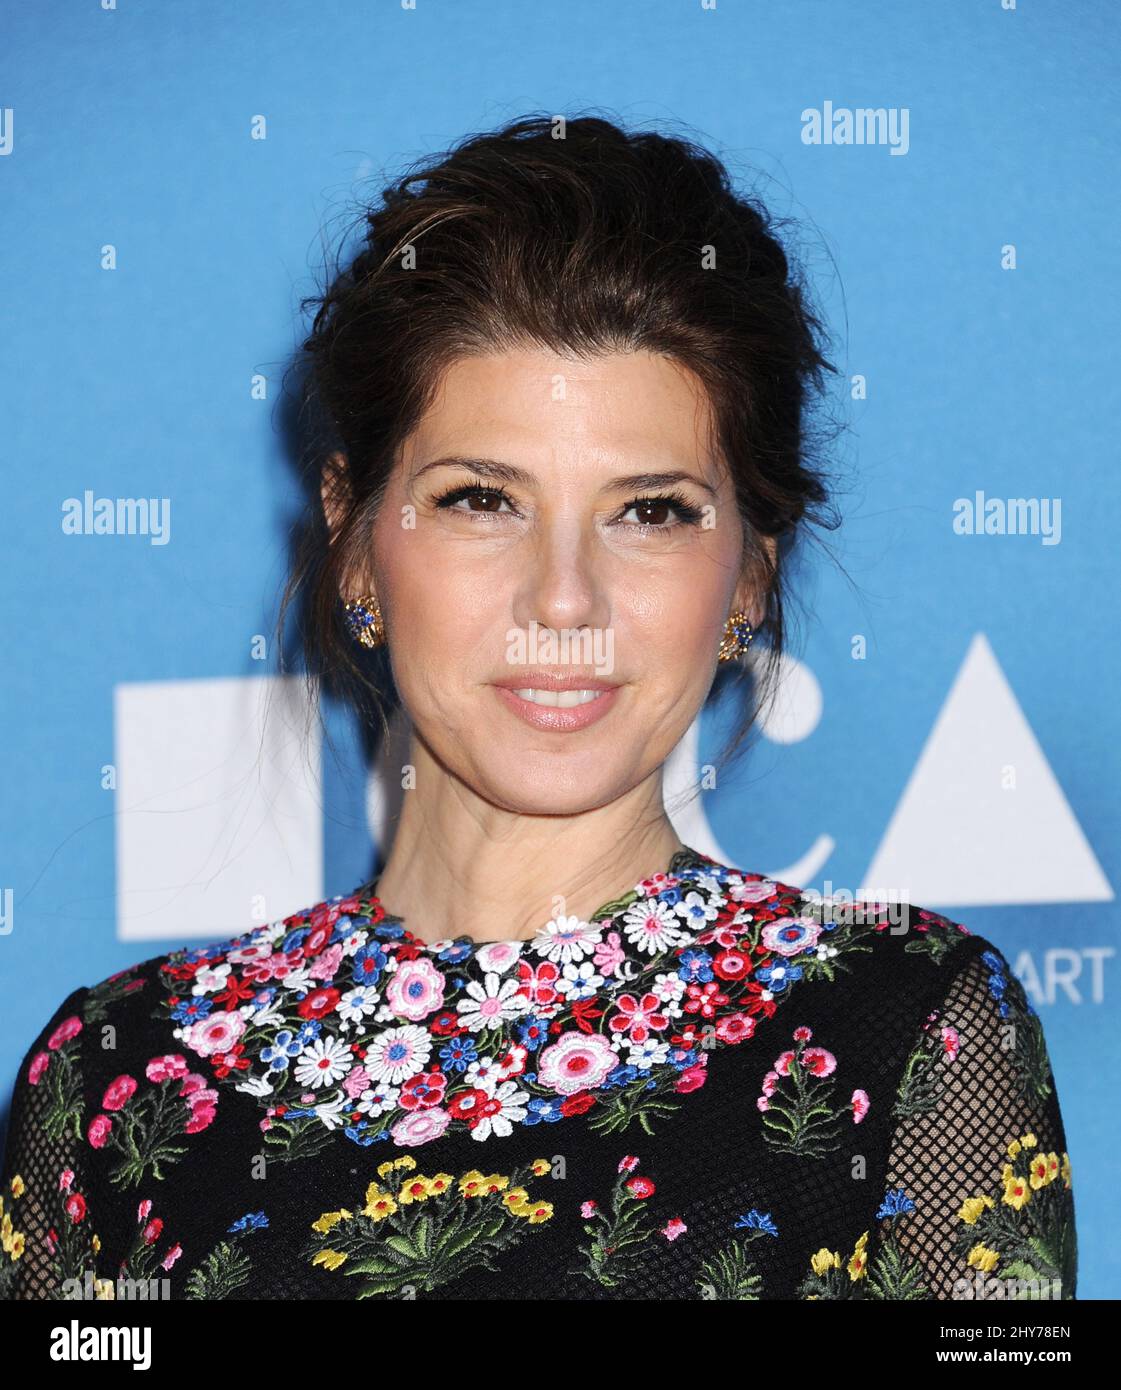 Marisa Tomei attends the annual Museum of Contemporary Art Gala in Los Angeles on Saturday, May 30, 2015. Stock Photo